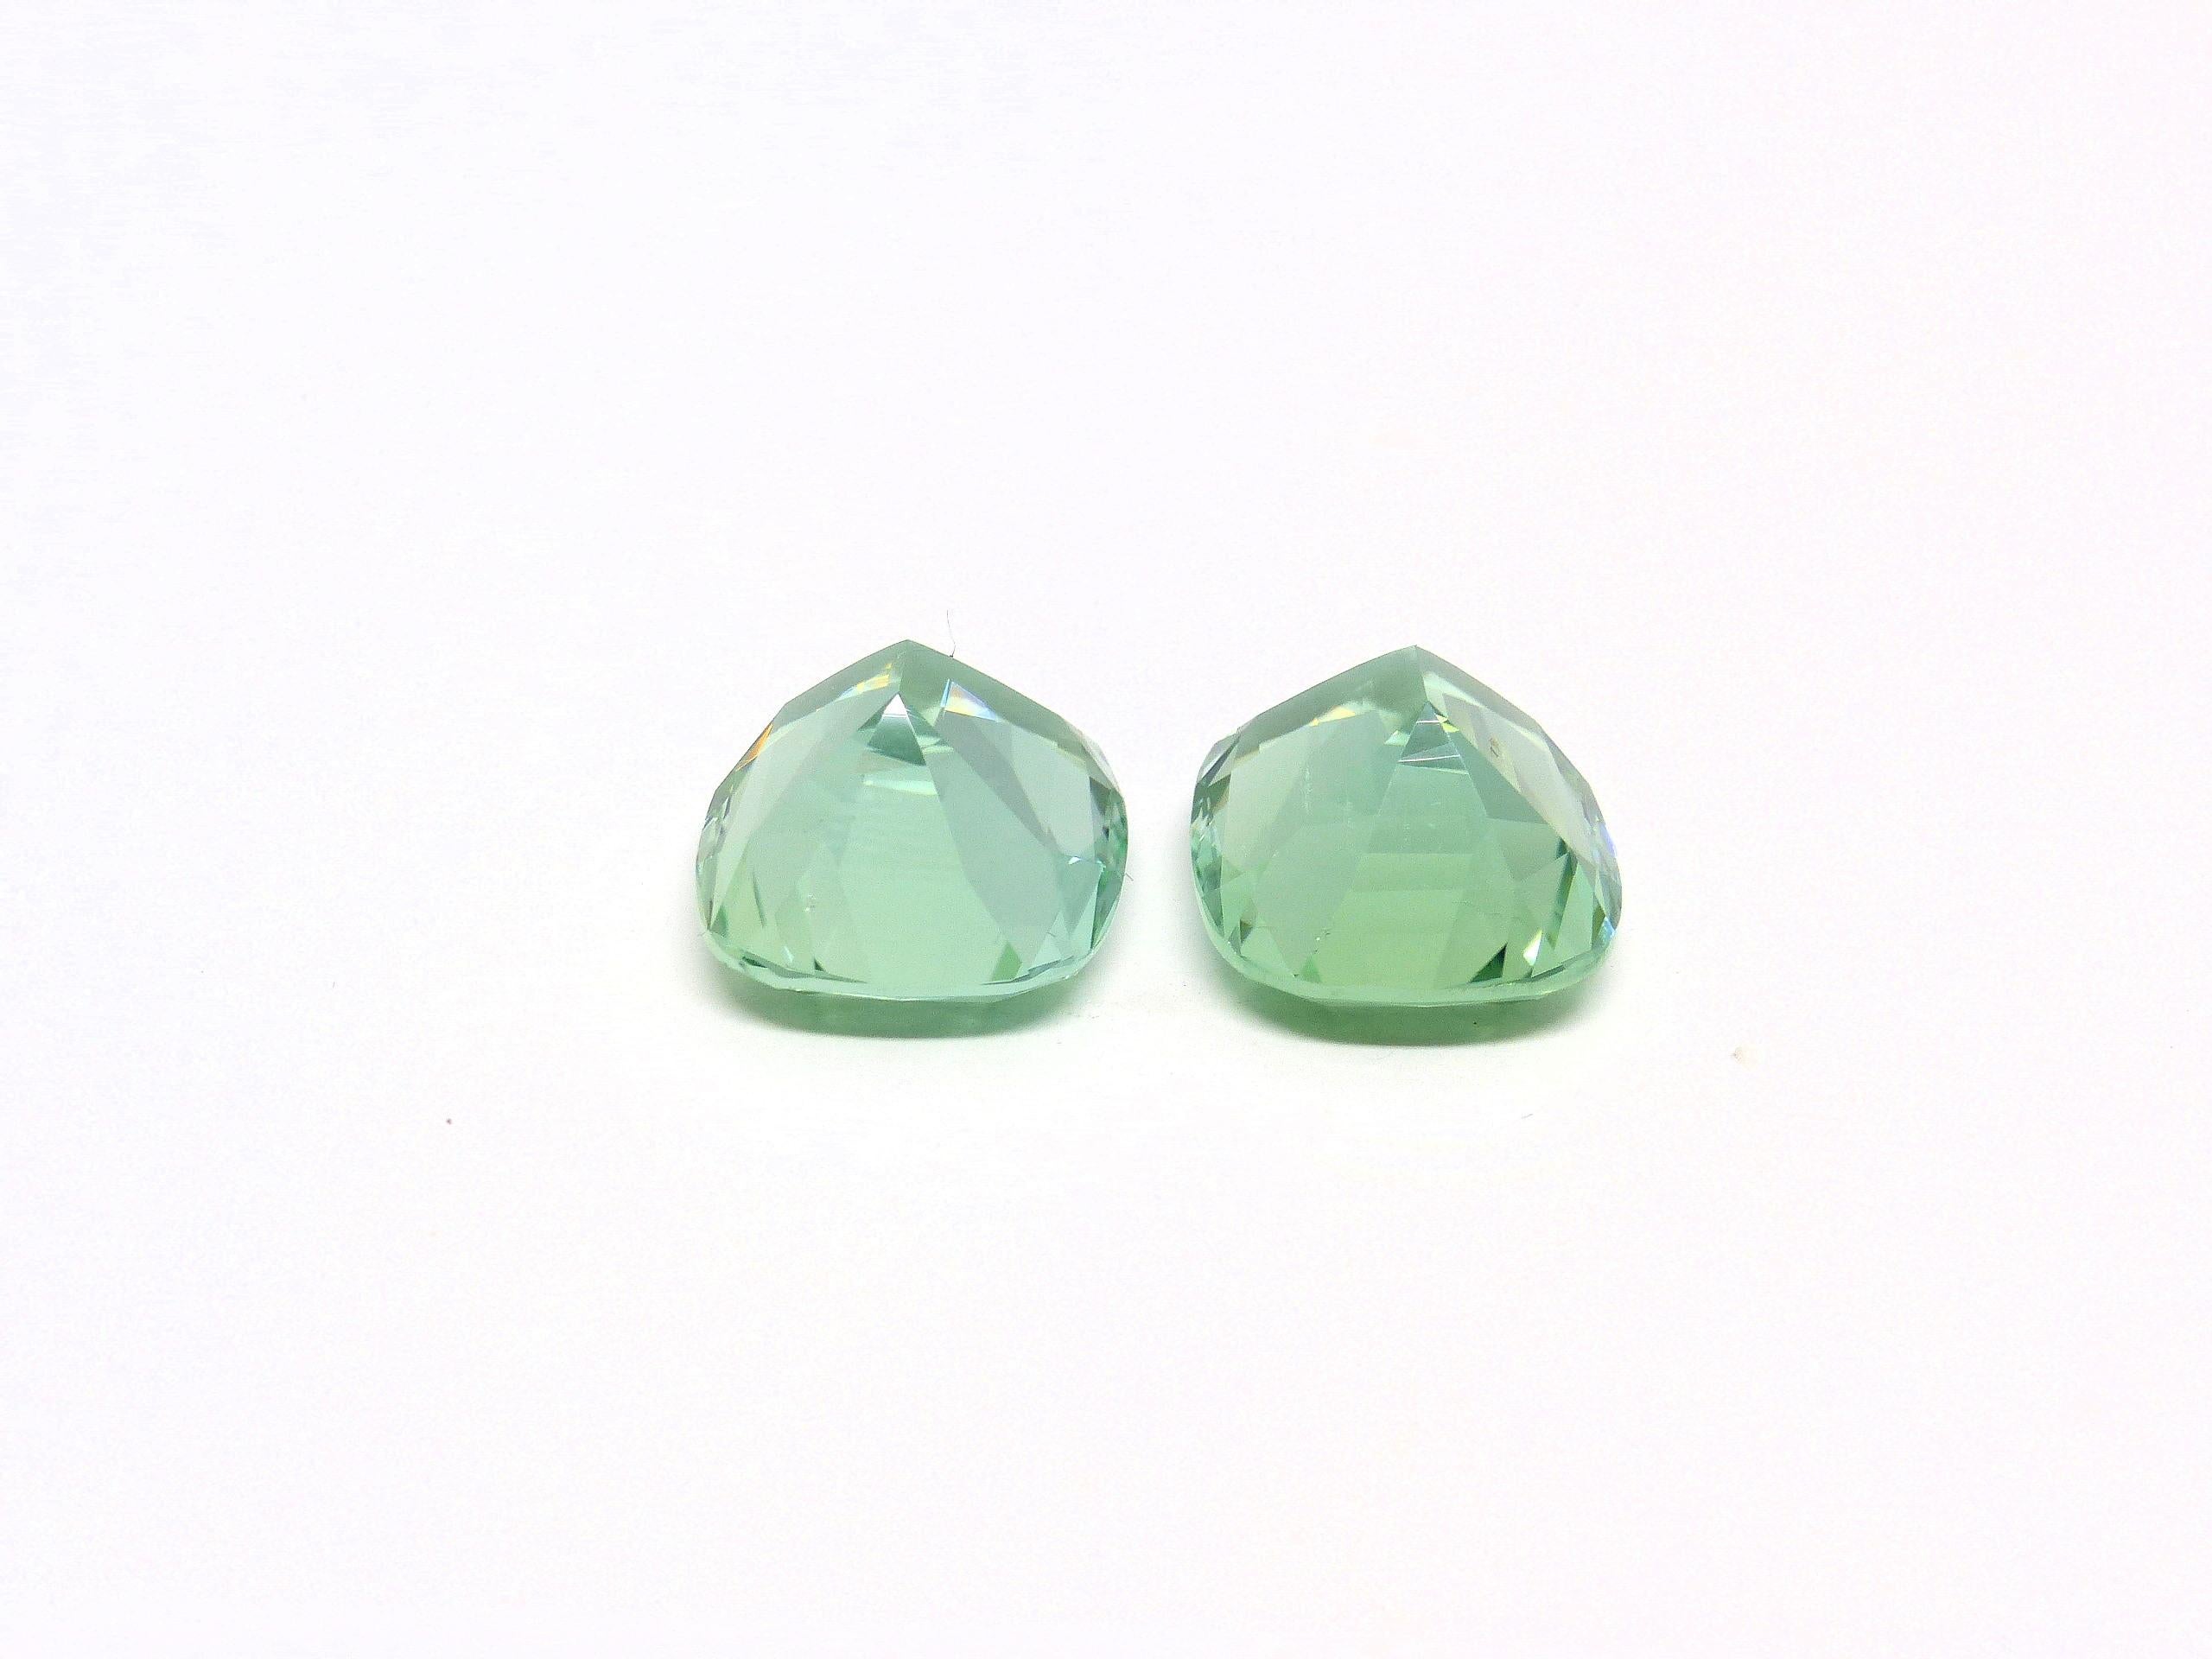 Cushion Cut 1 Pair of 2 Magnificent Mintgreen Tourmalines Cut with Large Facettes For Sale